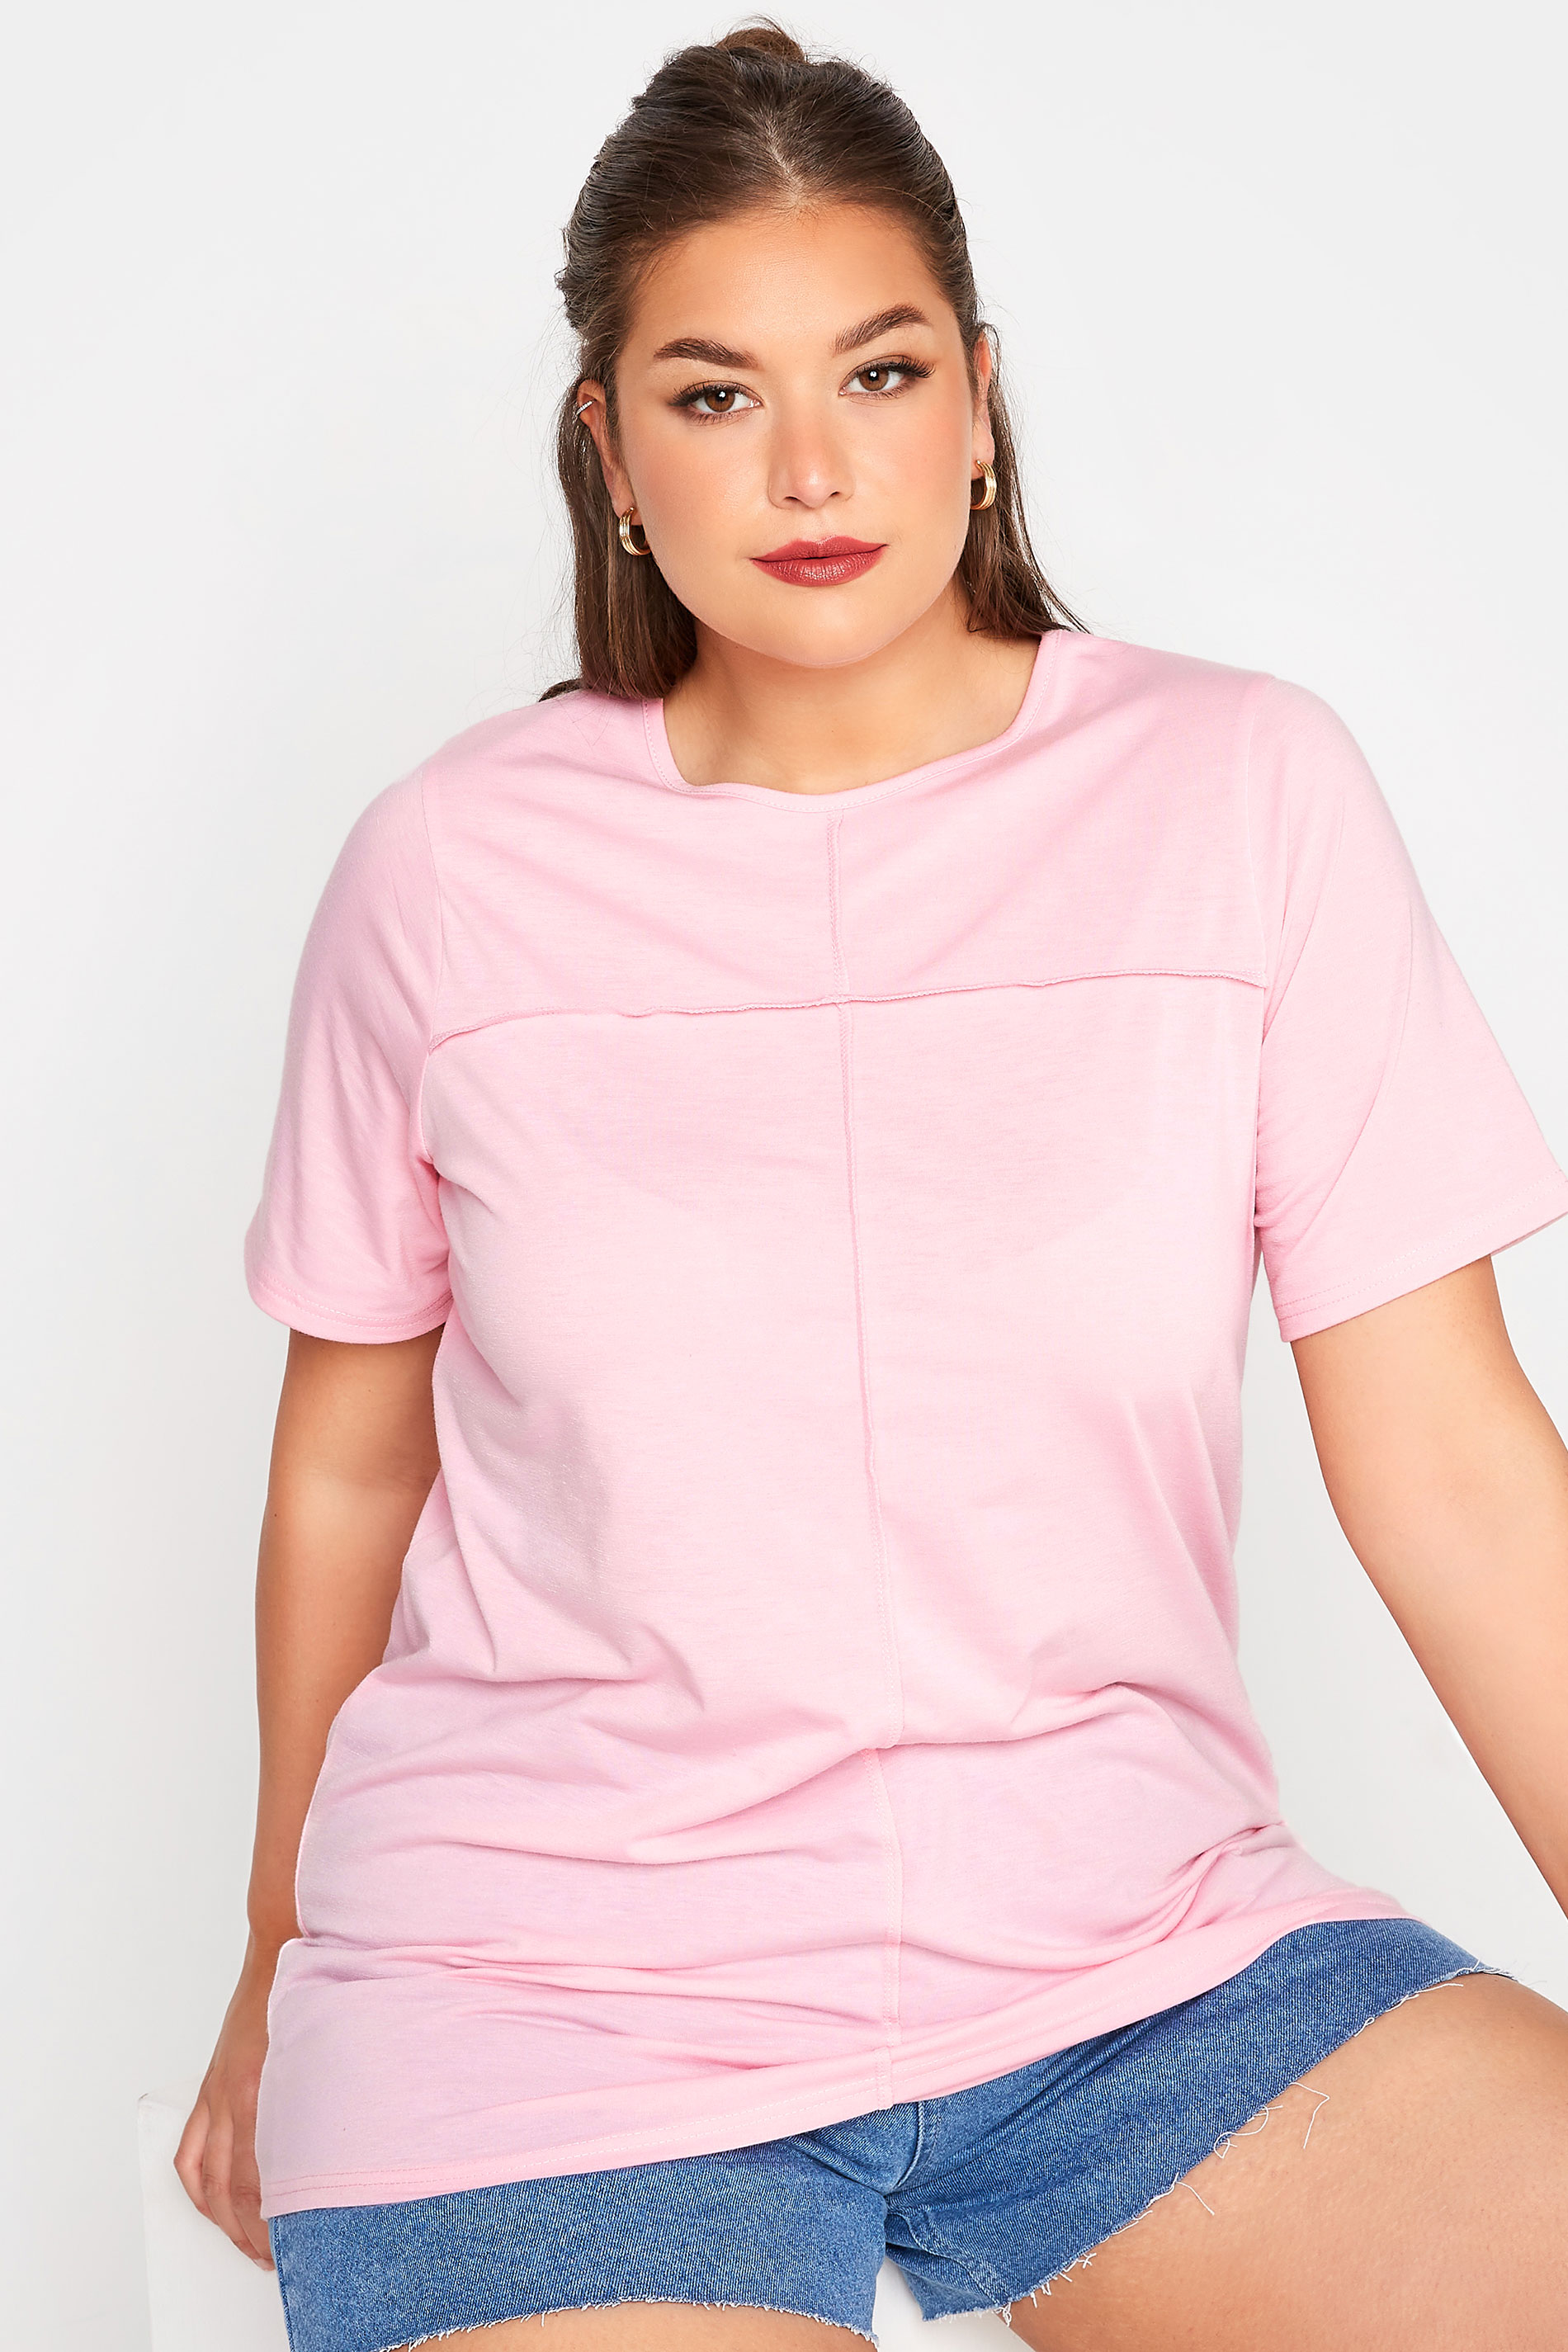 LIMITED COLLECTION Curve Pink Exposed Seam T-Shirt_D.jpg